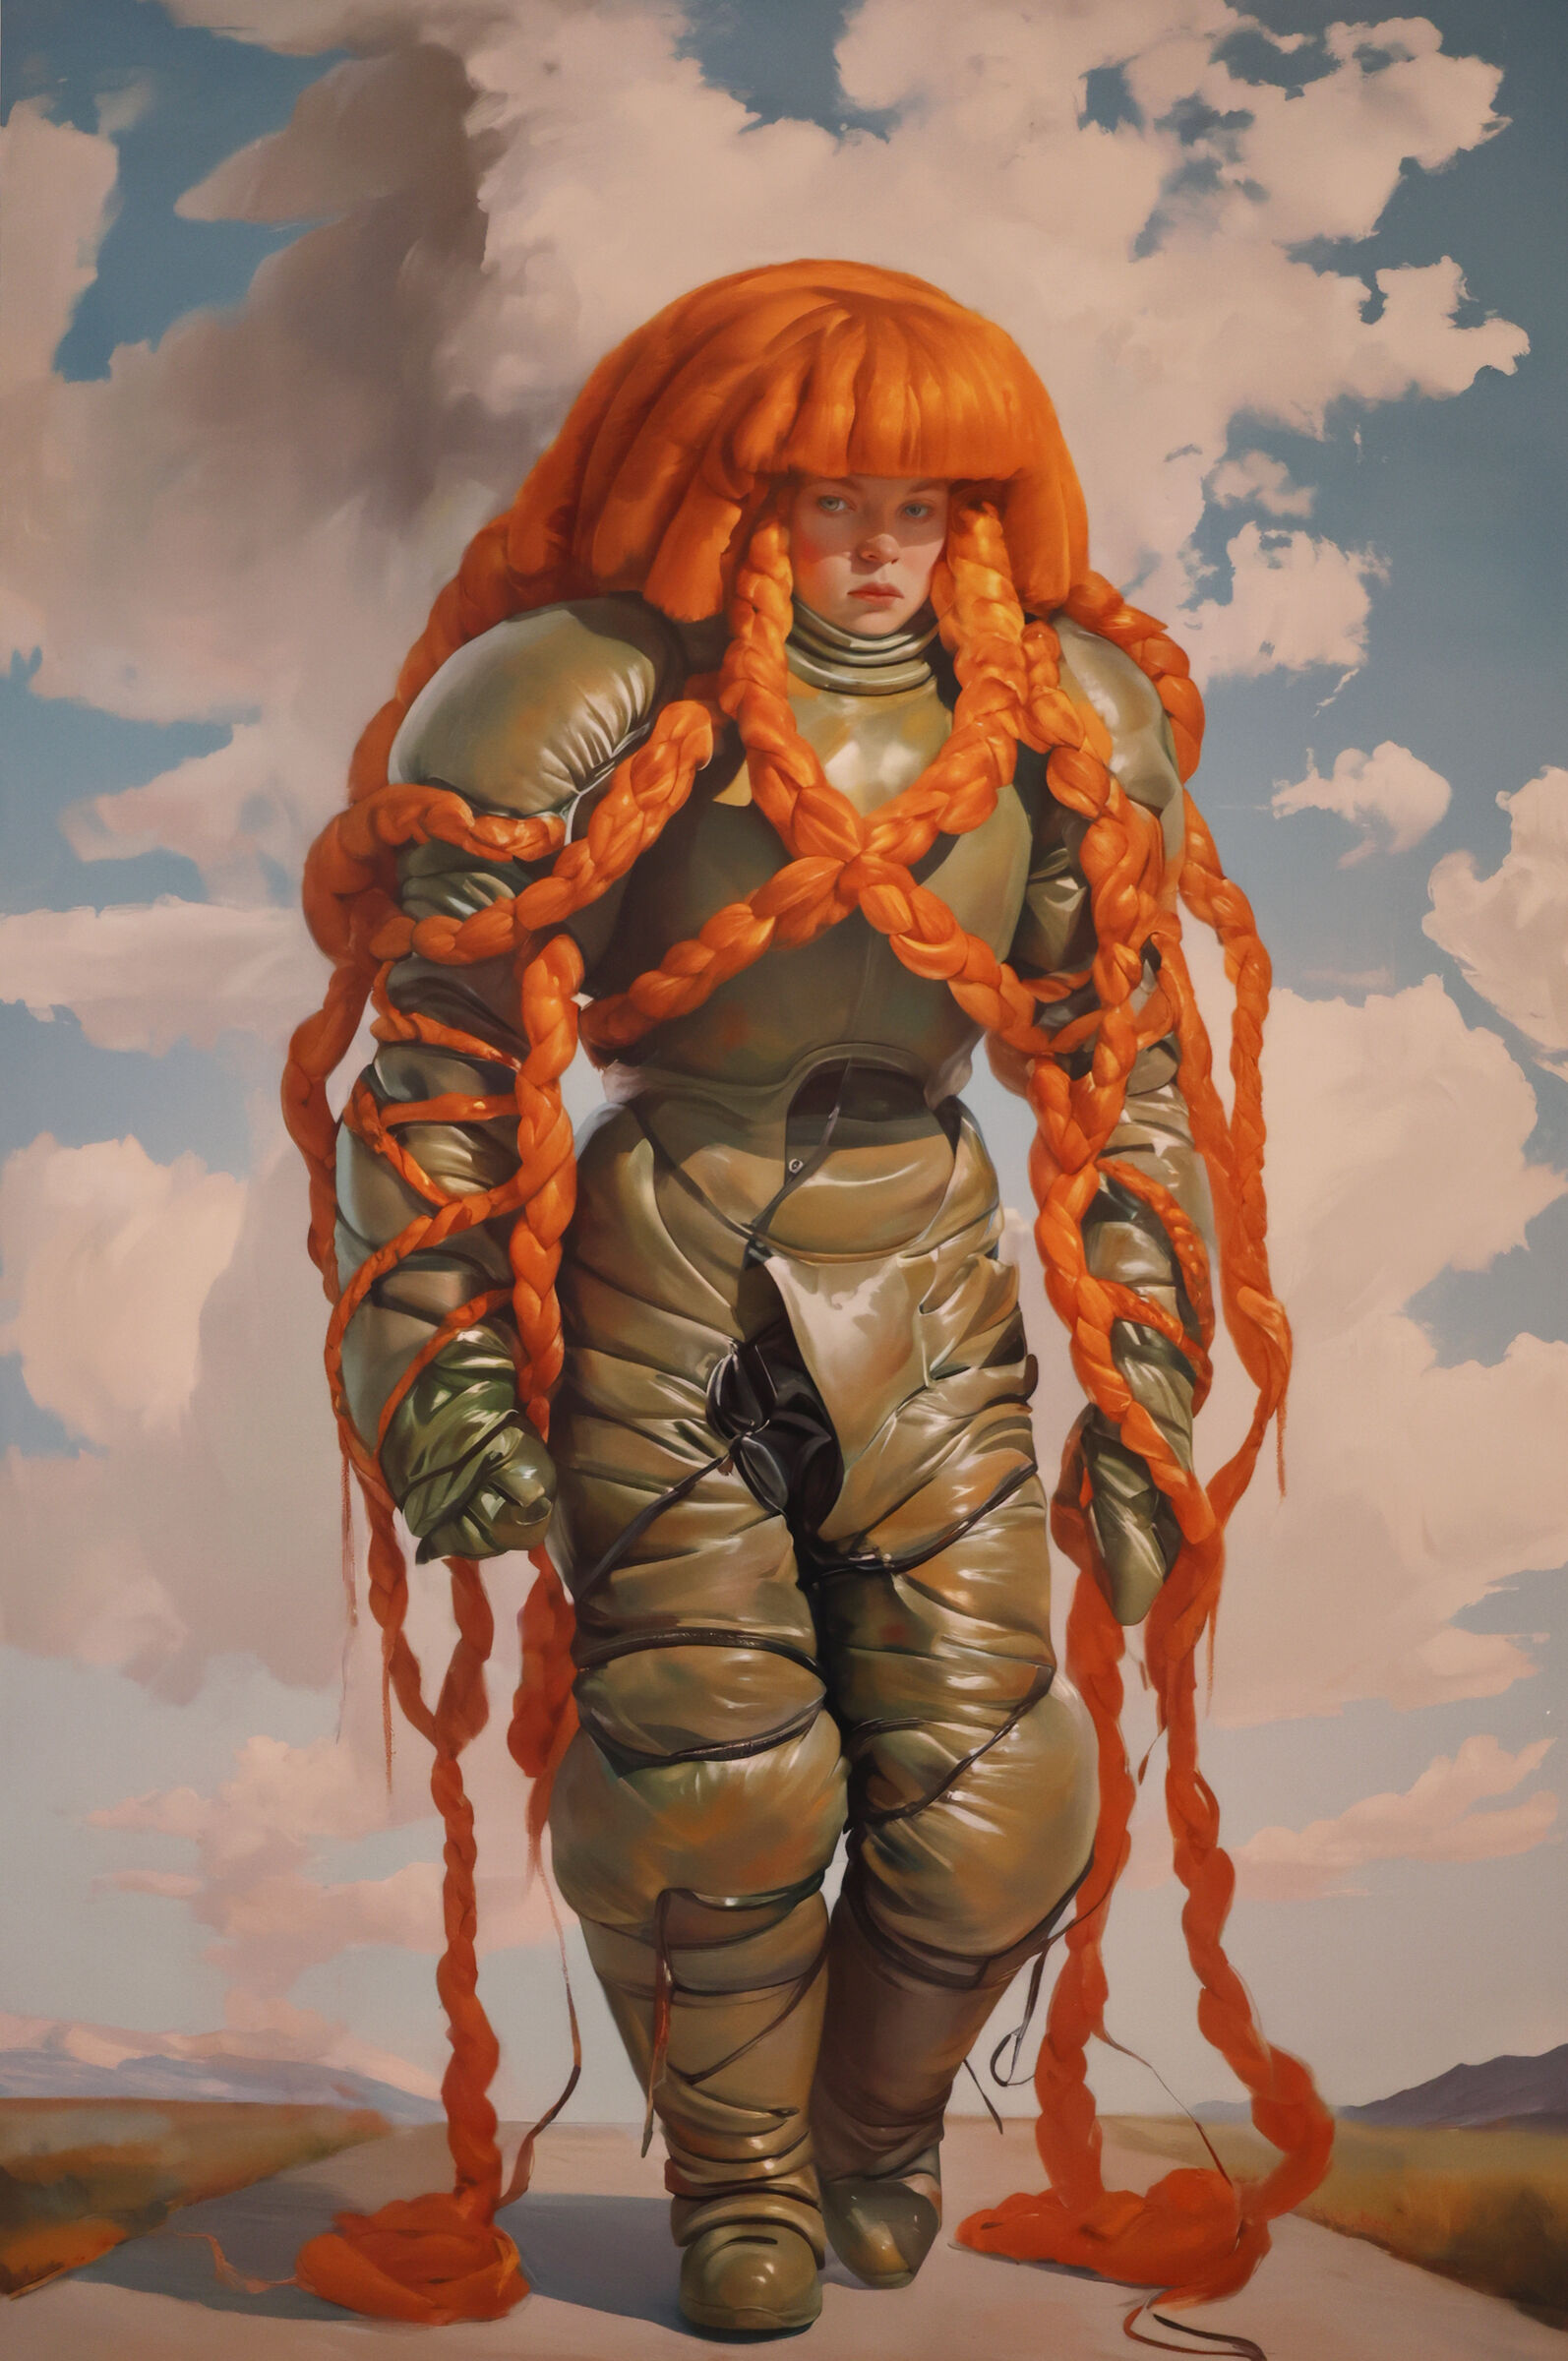 Person in a puffy green suit with voluminous orange braids against a sky with clouds.